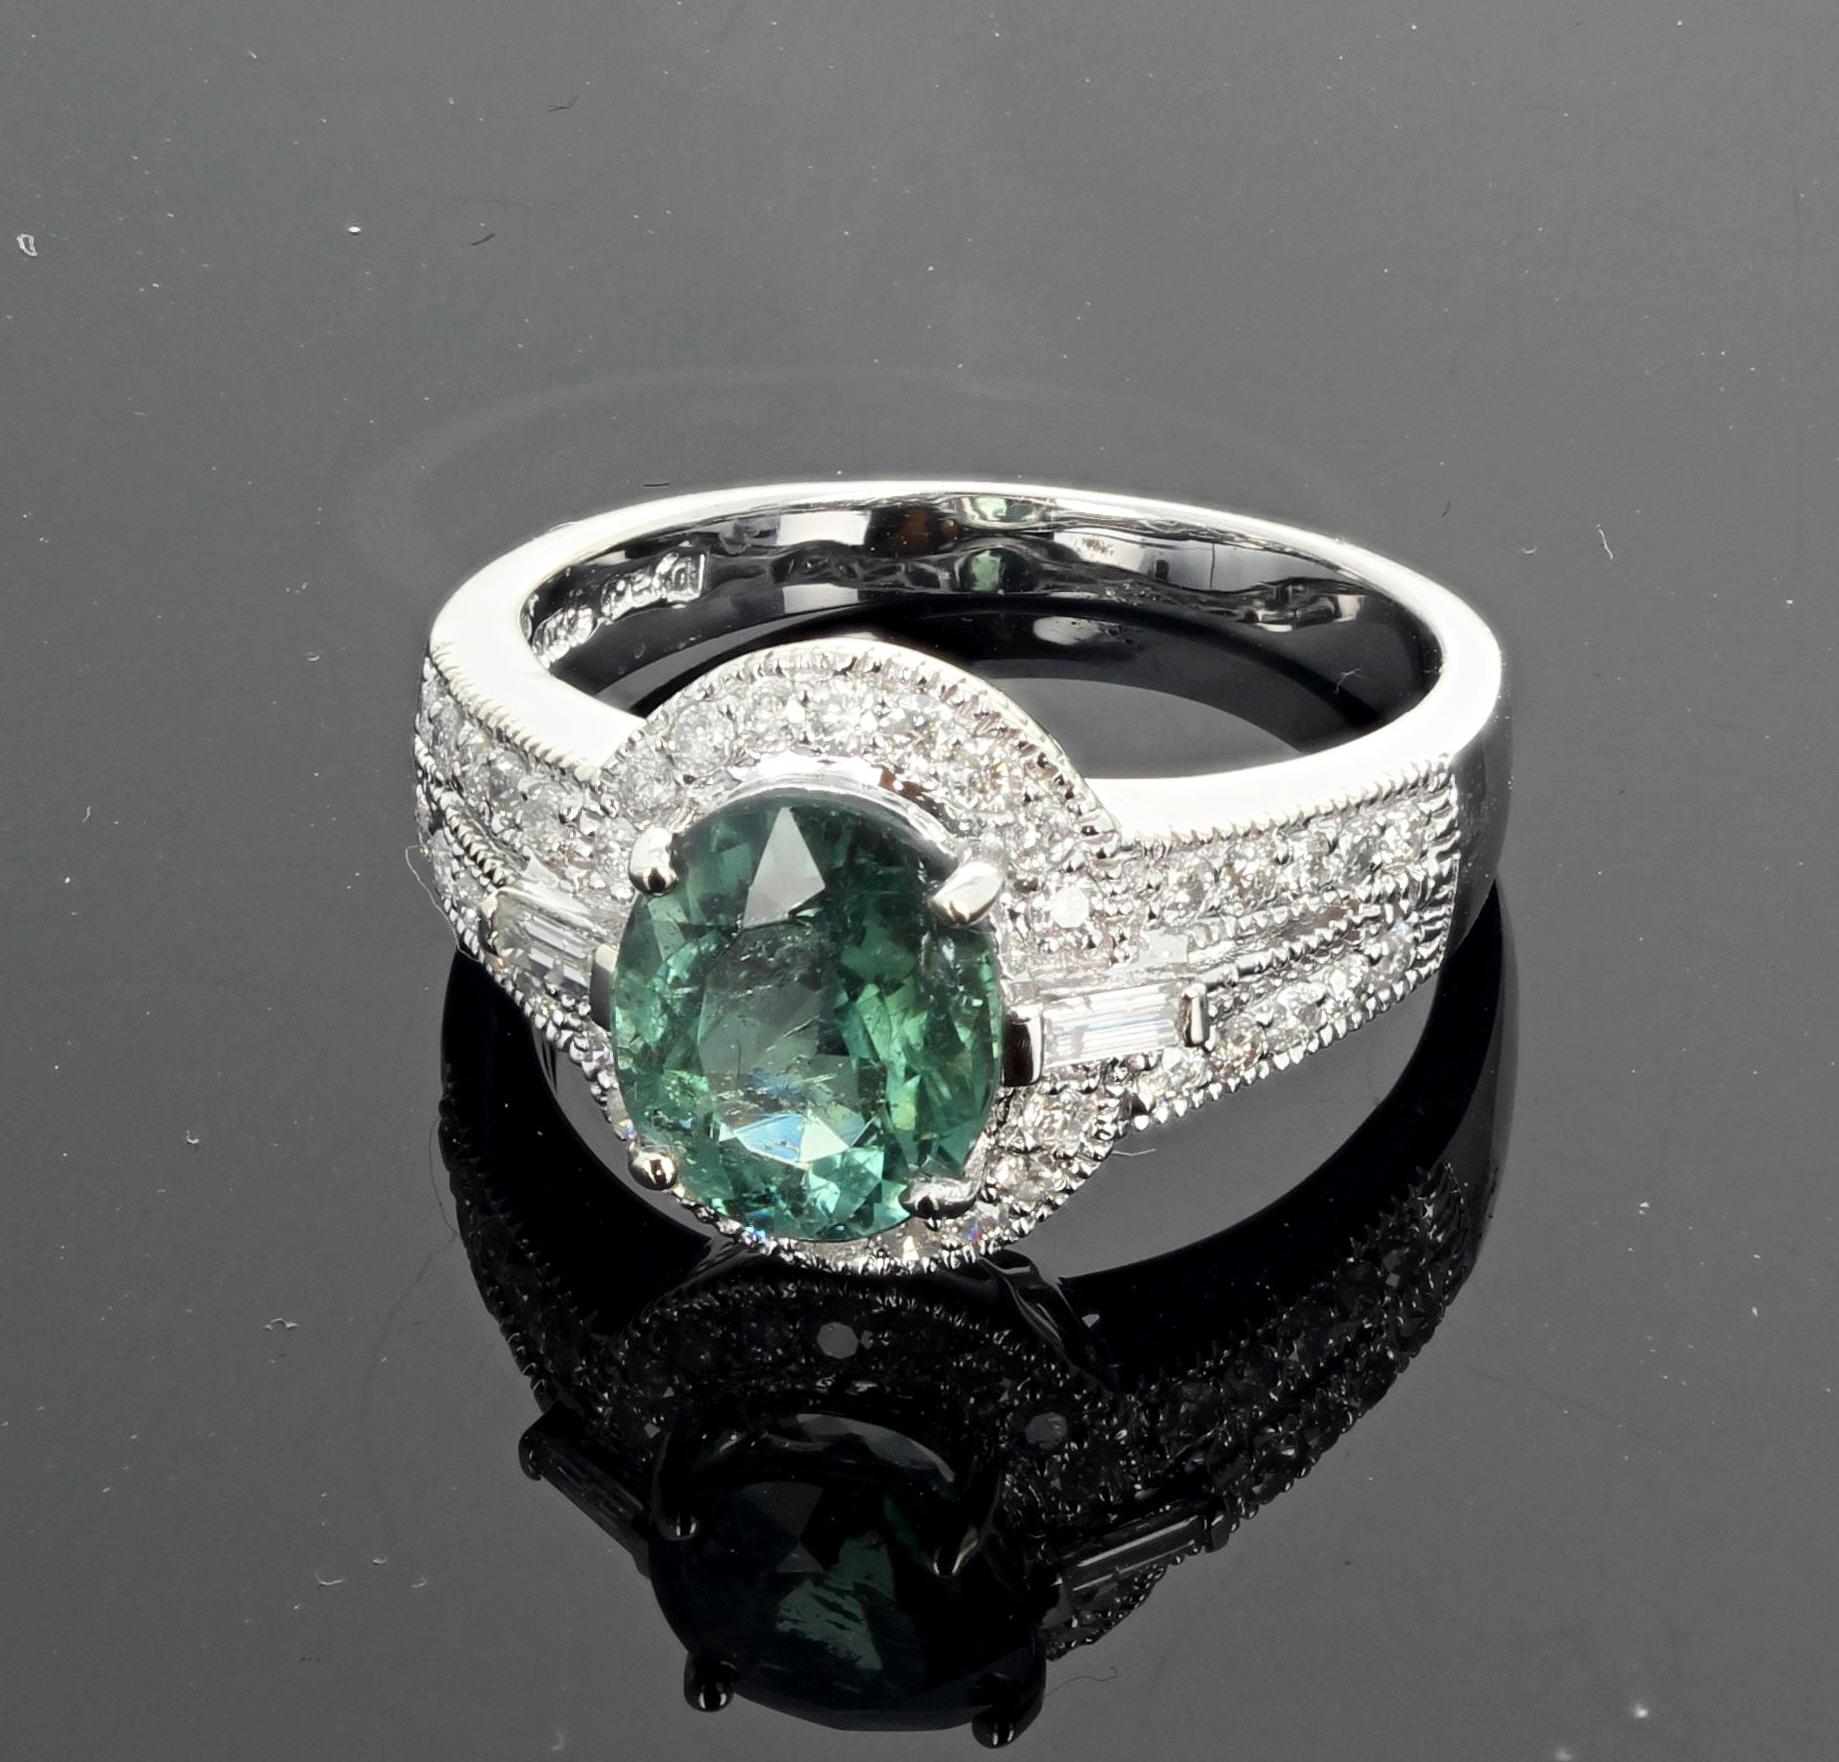 Glittering brilliant oval 9 mm x 7 mm green Tourmaline set in a 14Kt White Gold ring enhanced with sparkling white Diamonds (0.50 carats).  This beautiful green Tourmaline ring is sizable 7 (we size for free) and would make a beautiful engagement